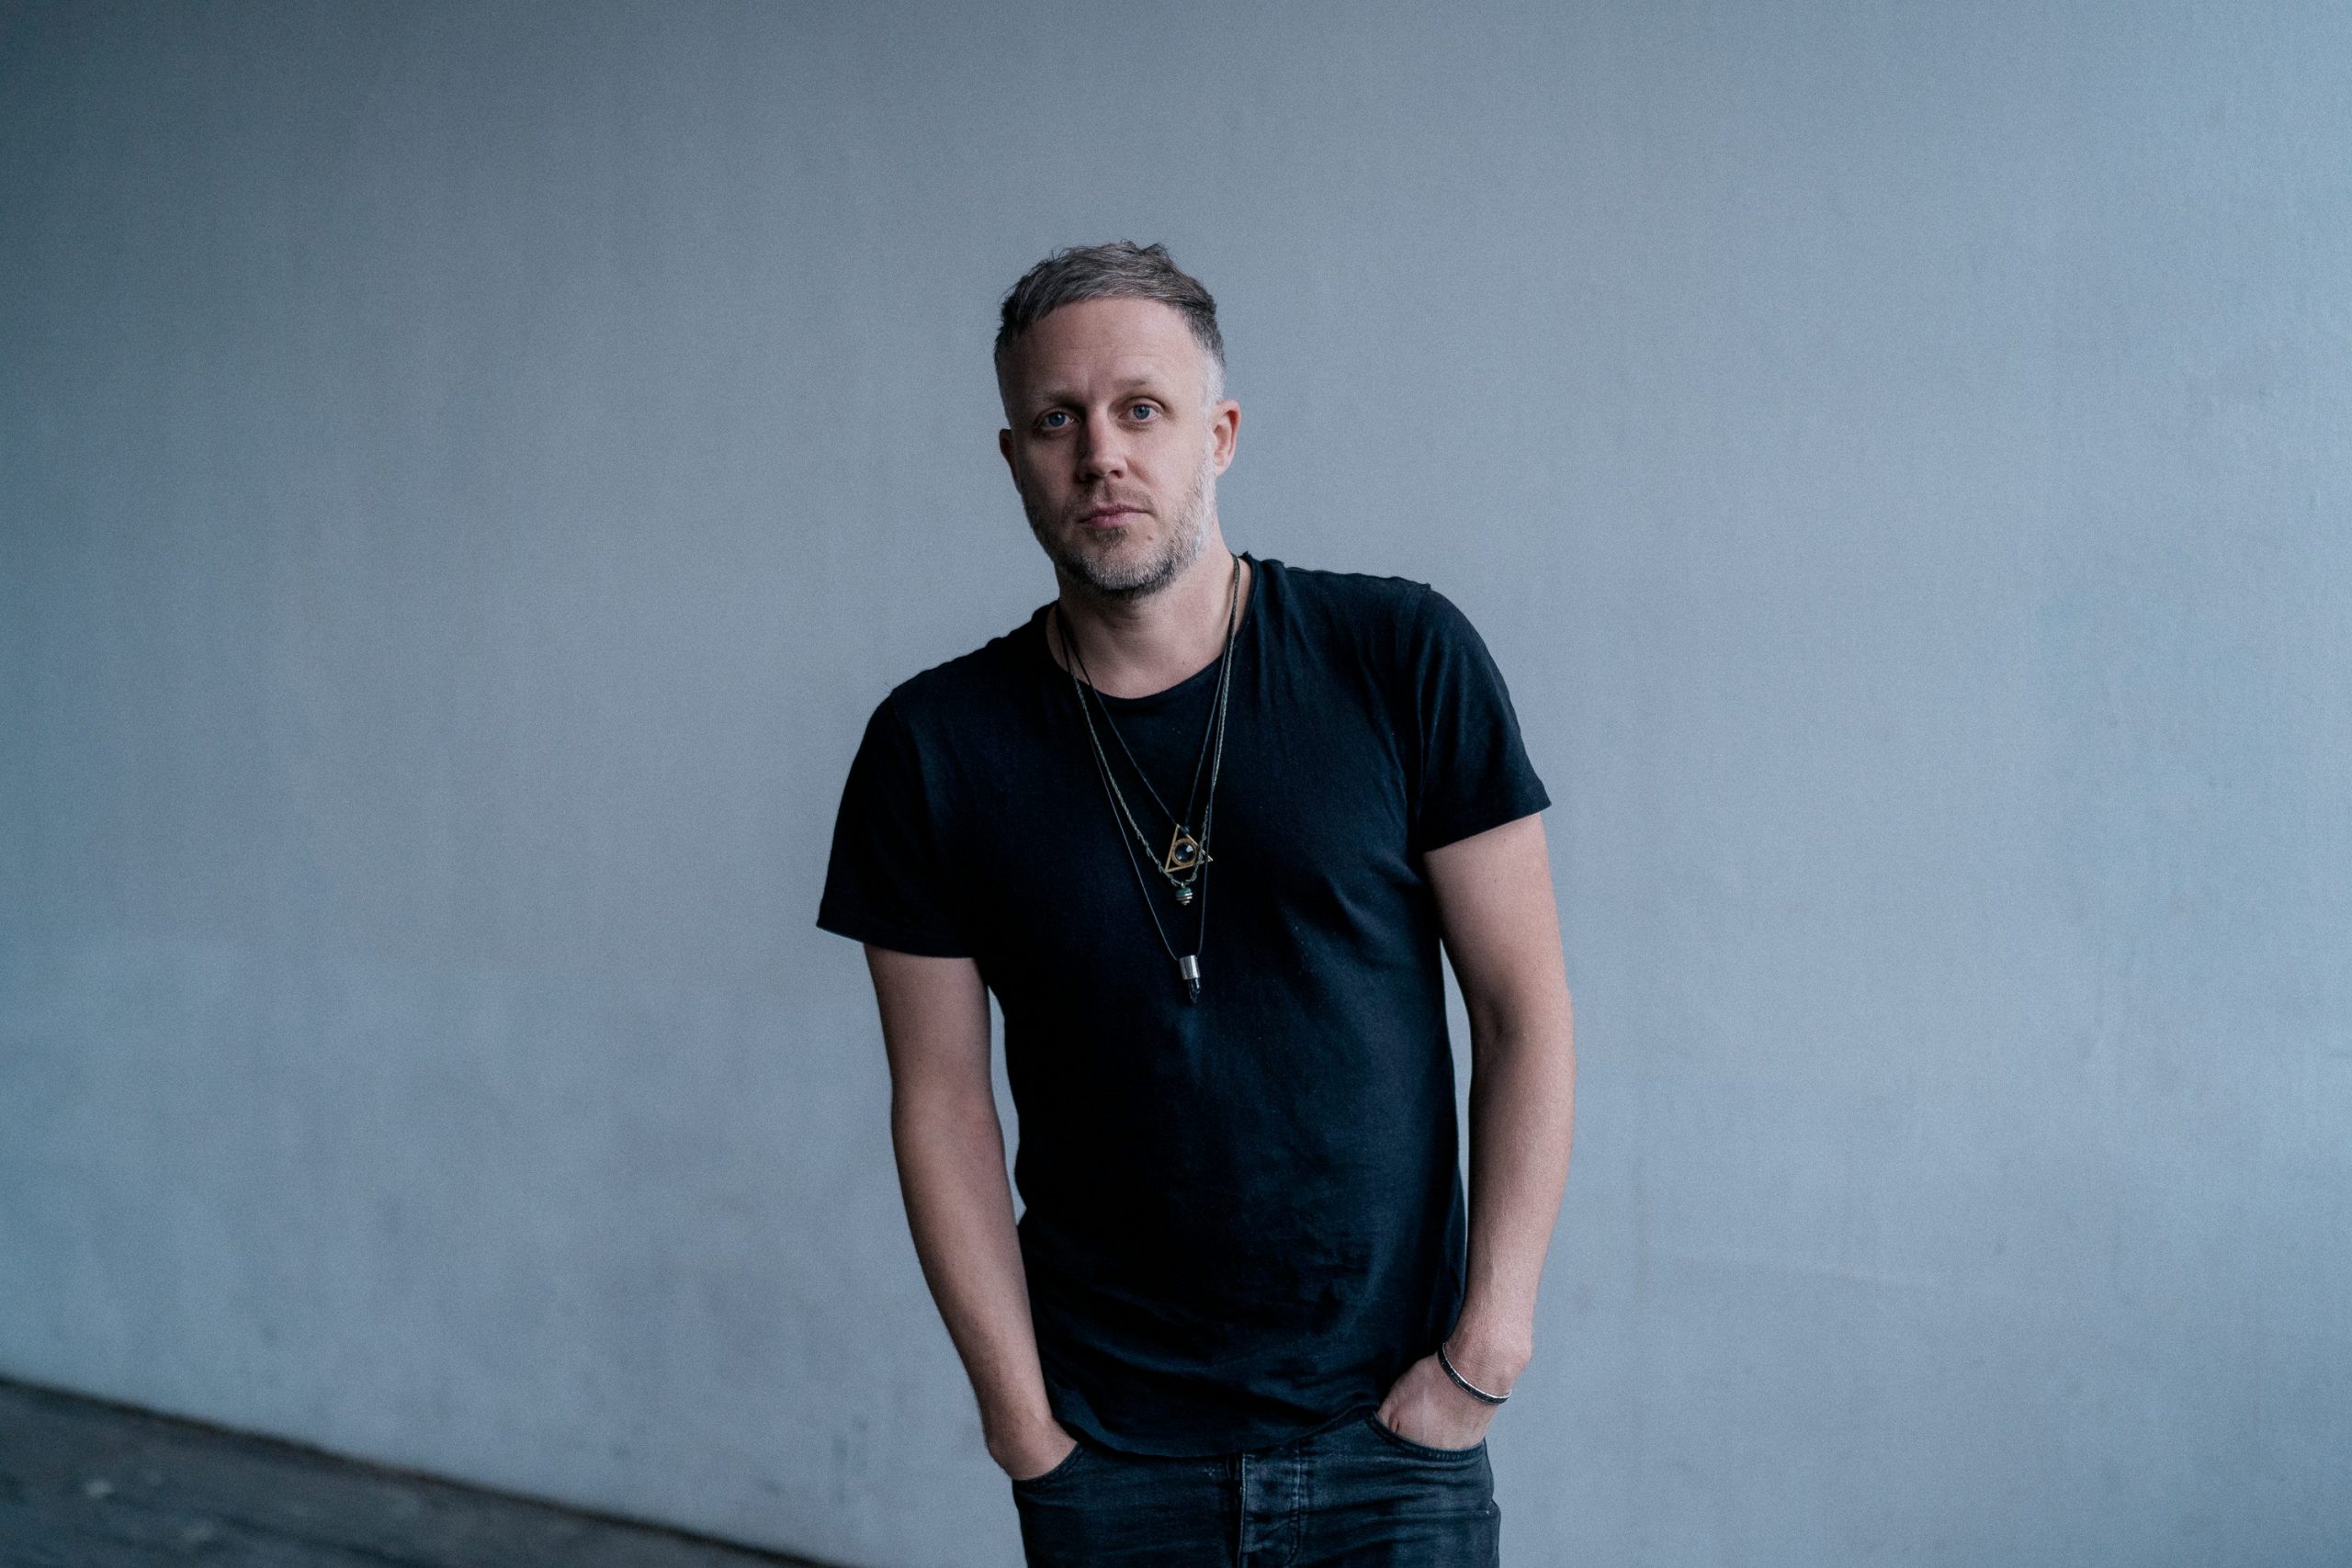 Jan Blomqvist Opens Up About the New Single "Alone", His Struggles, and